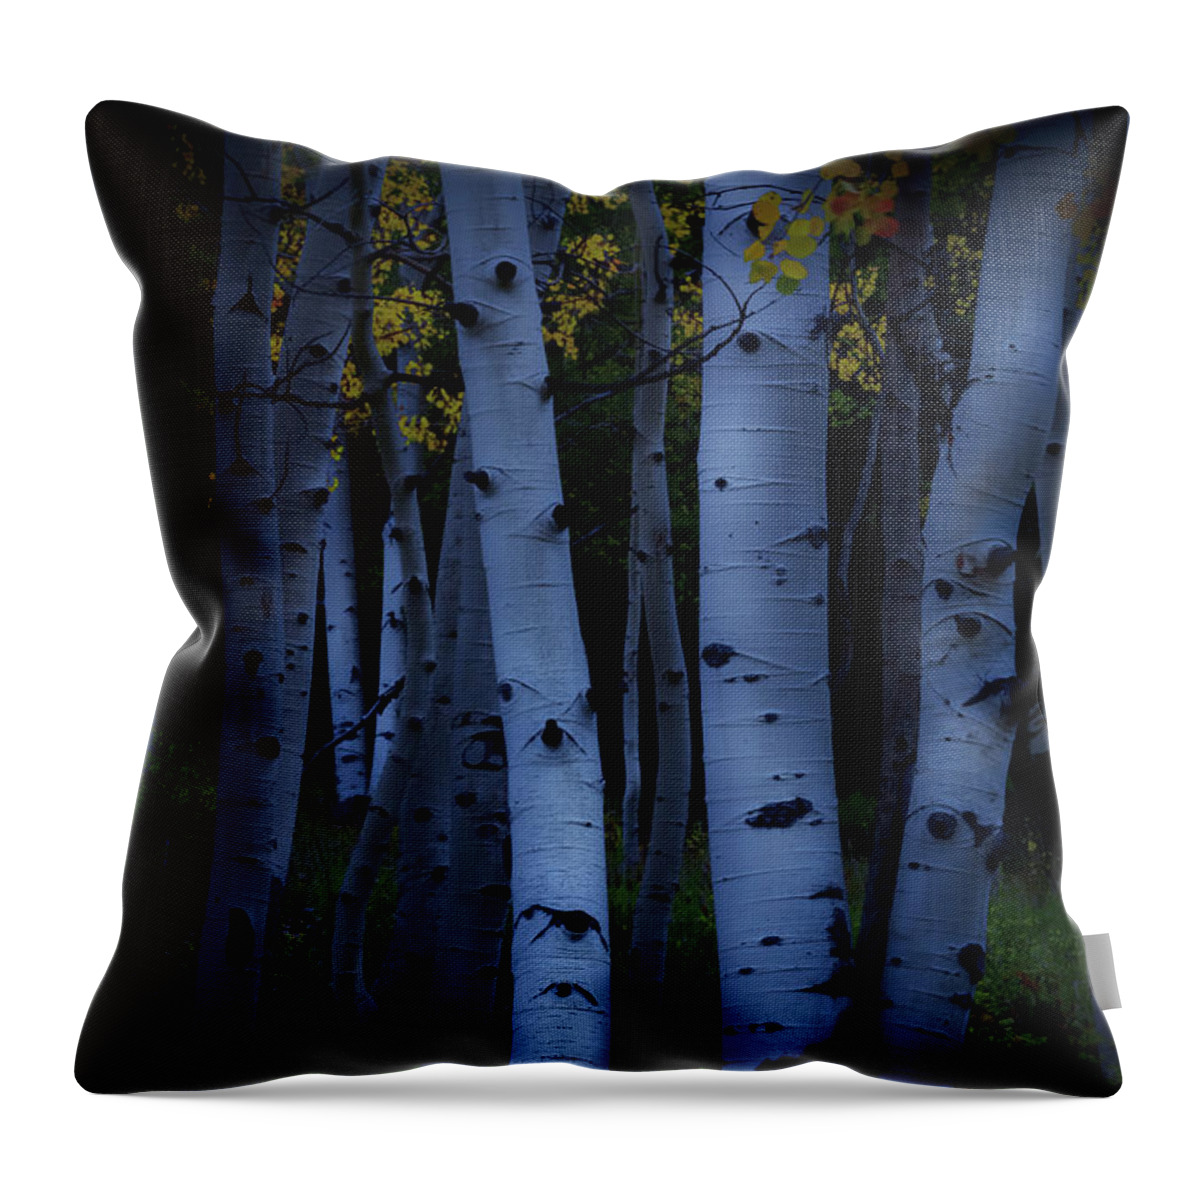 Aspen Trees Throw Pillow featuring the photograph Moonlight Aspens by The Forests Edge Photography - Diane Sandoval